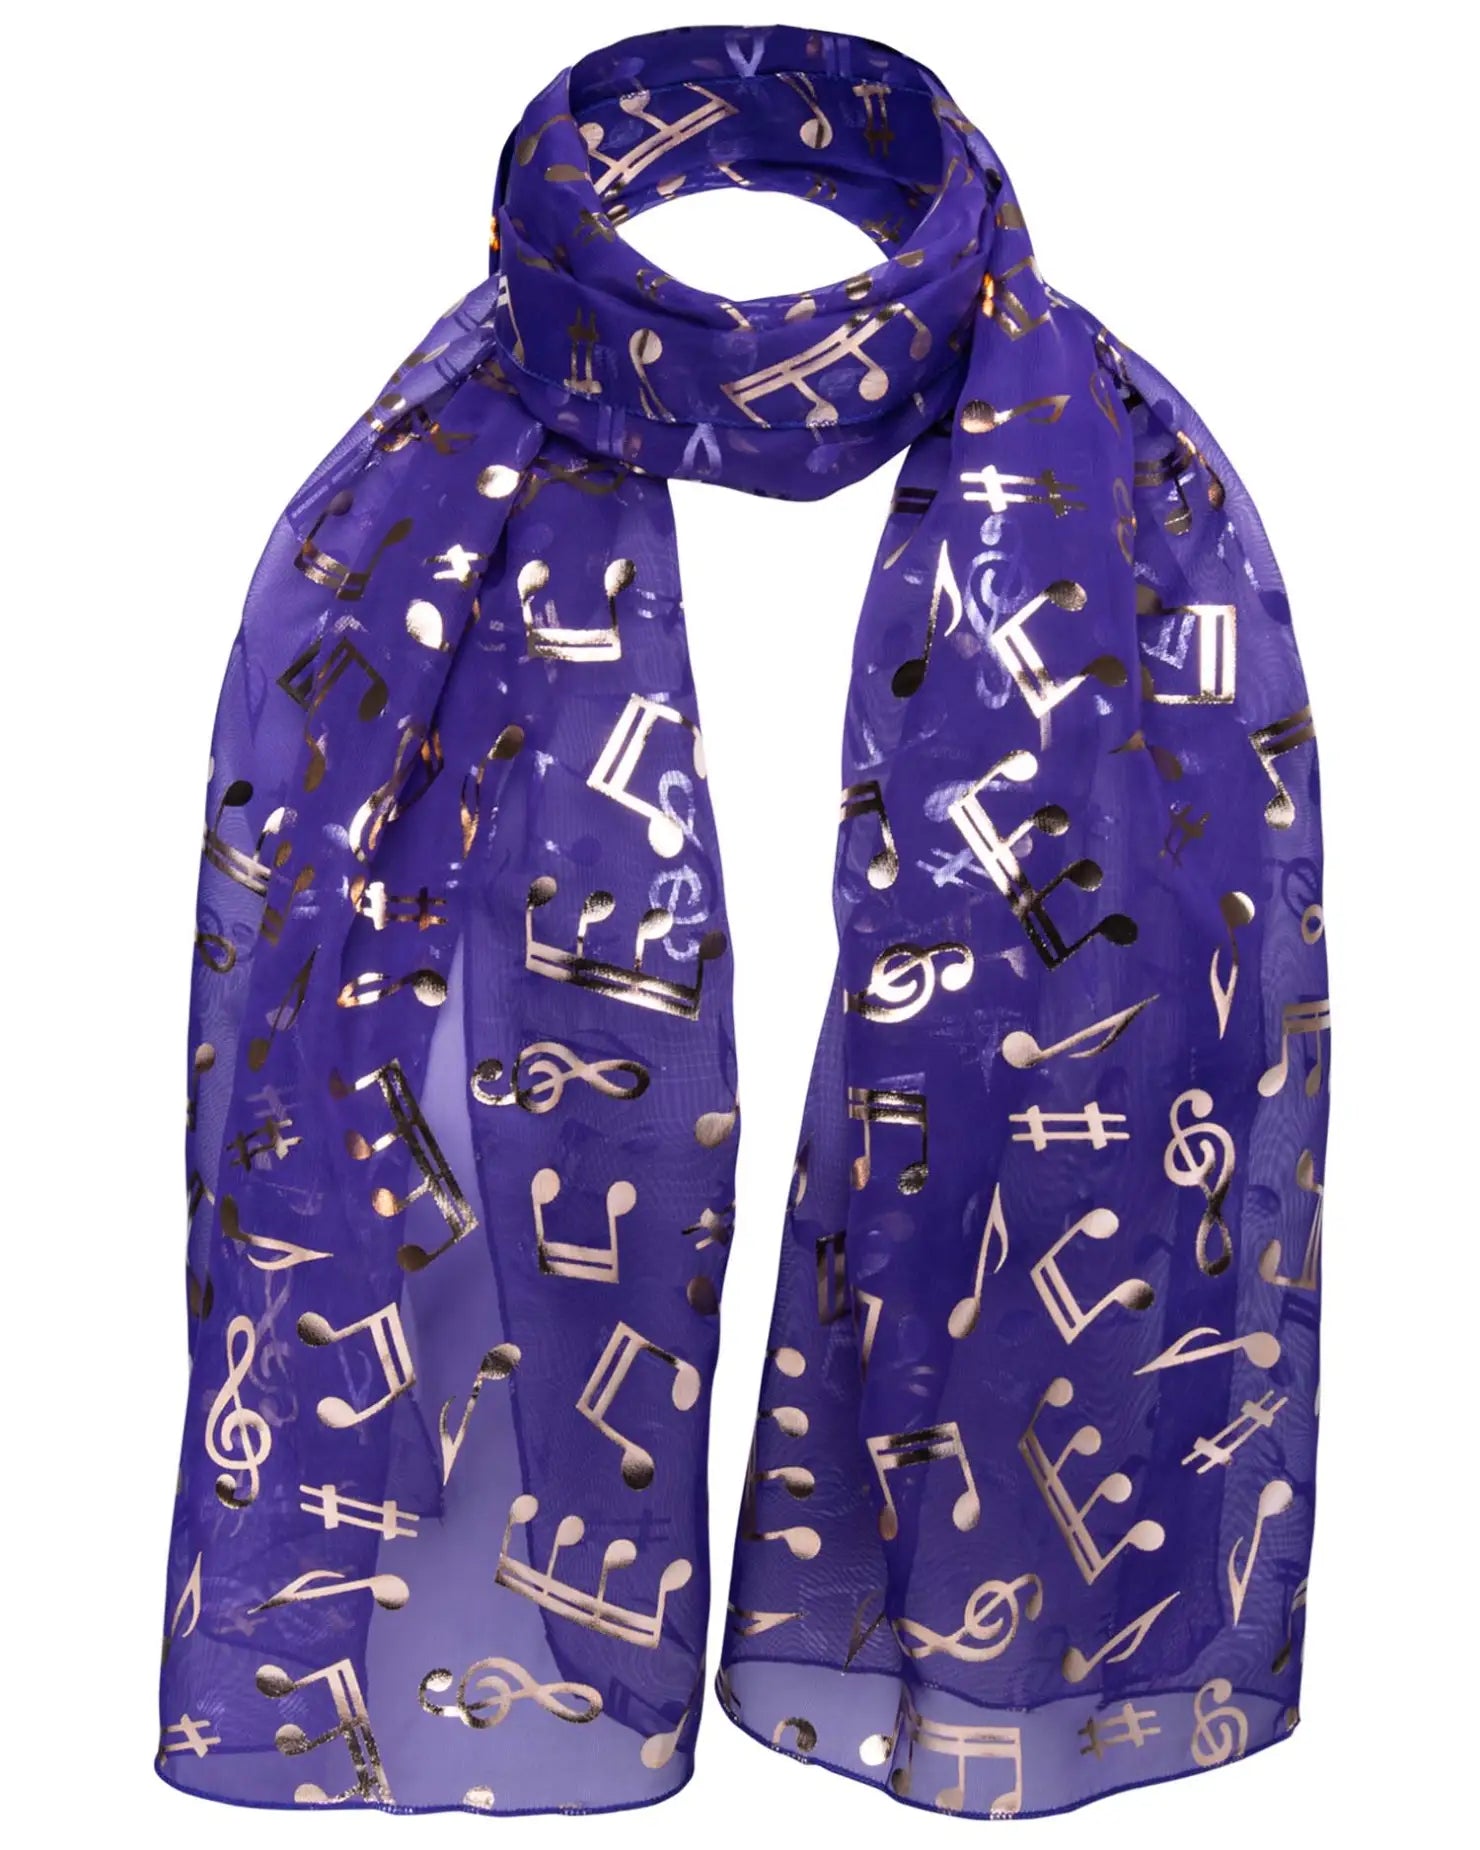 Gold Foil Music Note Chiffon Group Scarf - Purple scarf with musical notes.